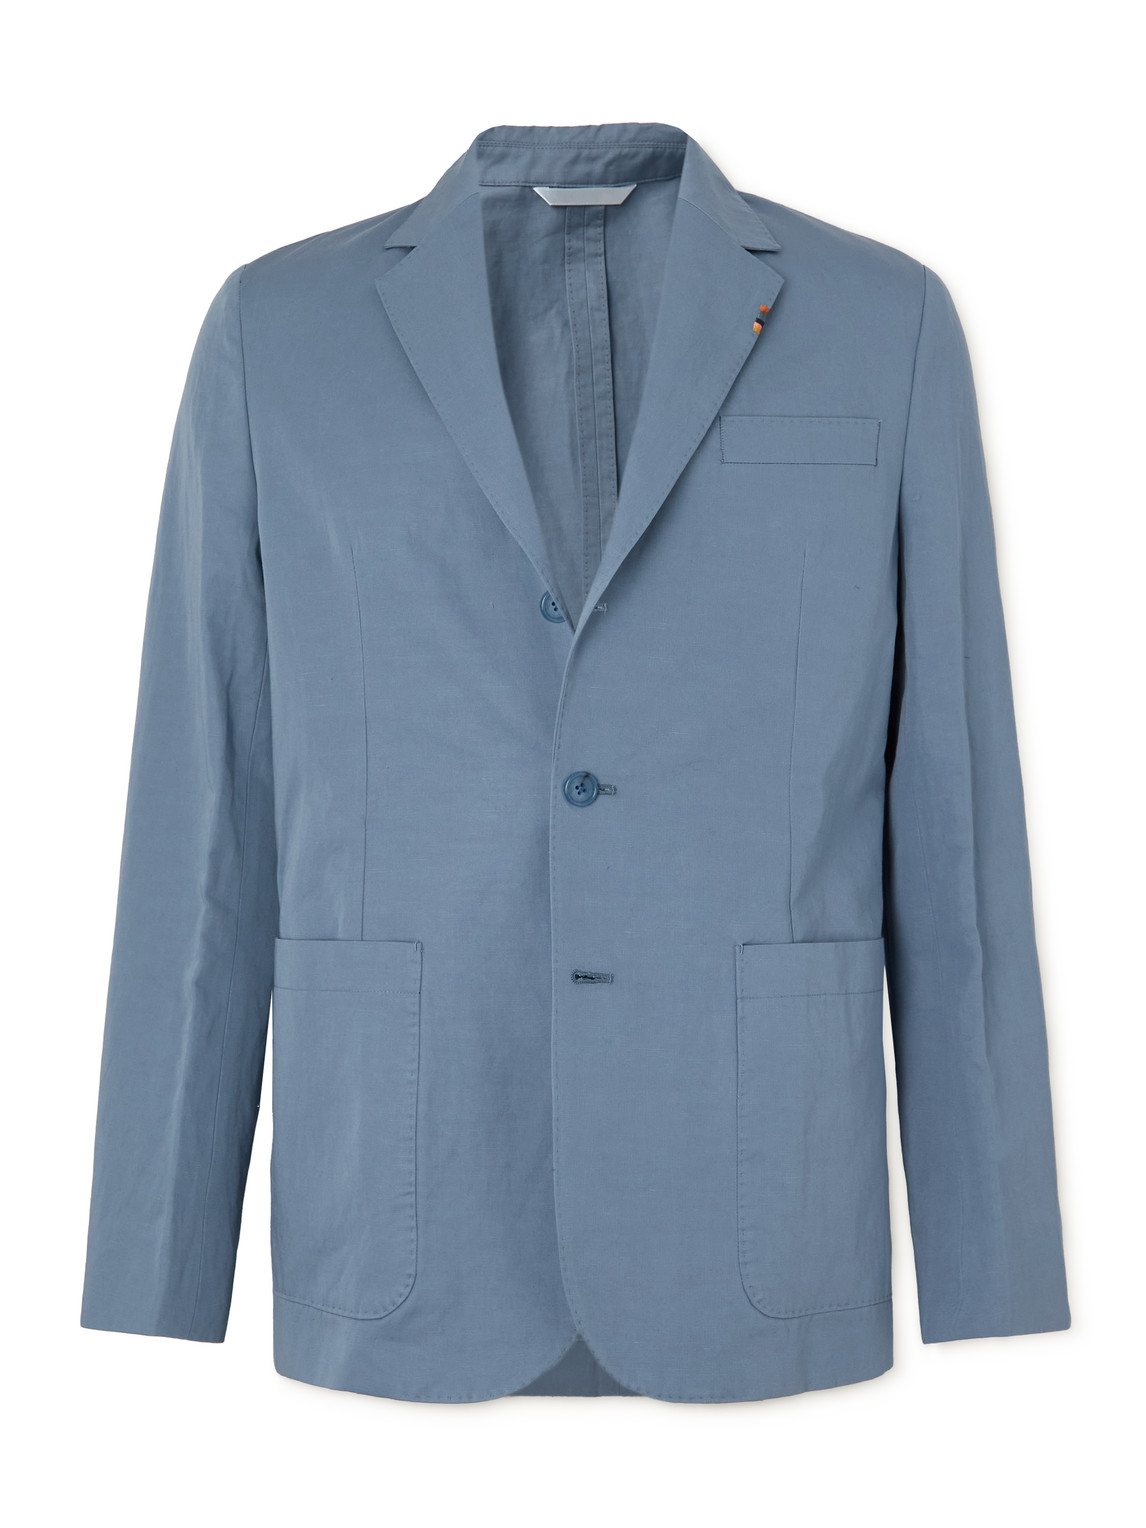 Paul Smith Soho Sharkskin Extra Slim Fit Suit - 100% Exclusive In Blue